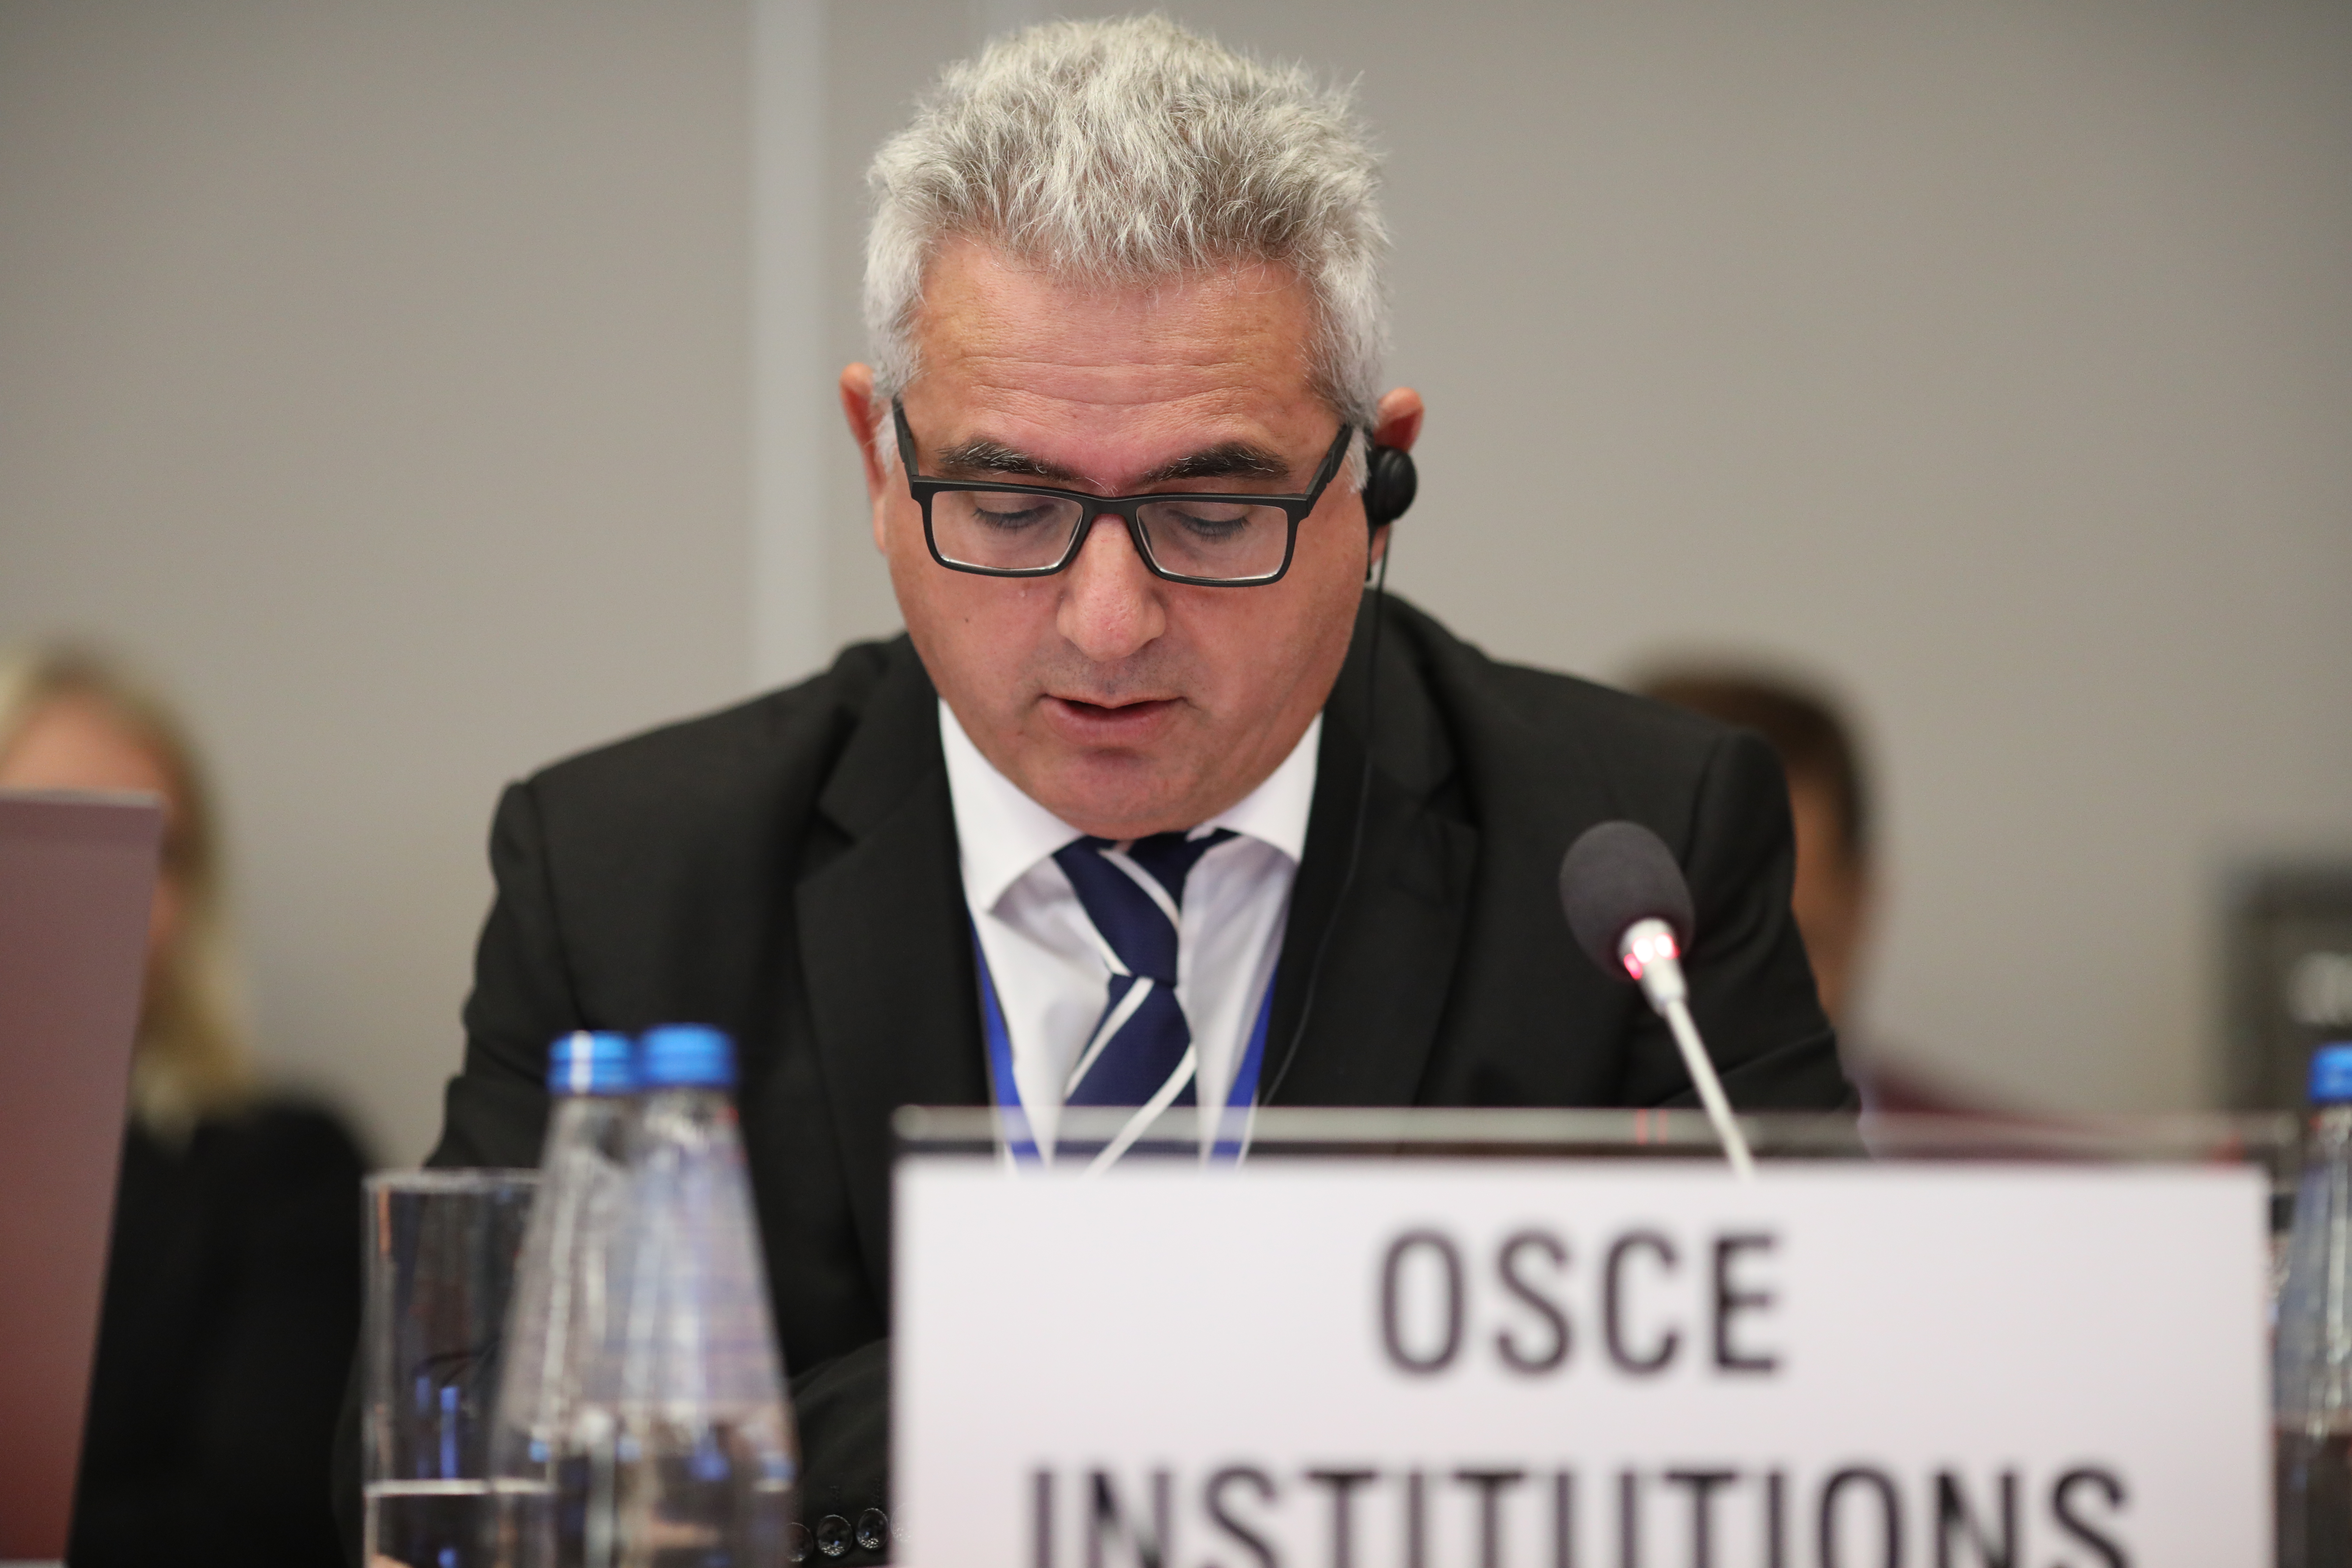 Human rights committee Rapporteur Kyriakos Hadjiyianni delivers remarks at freedom of the media session at 2018 HDIM in Warsaw